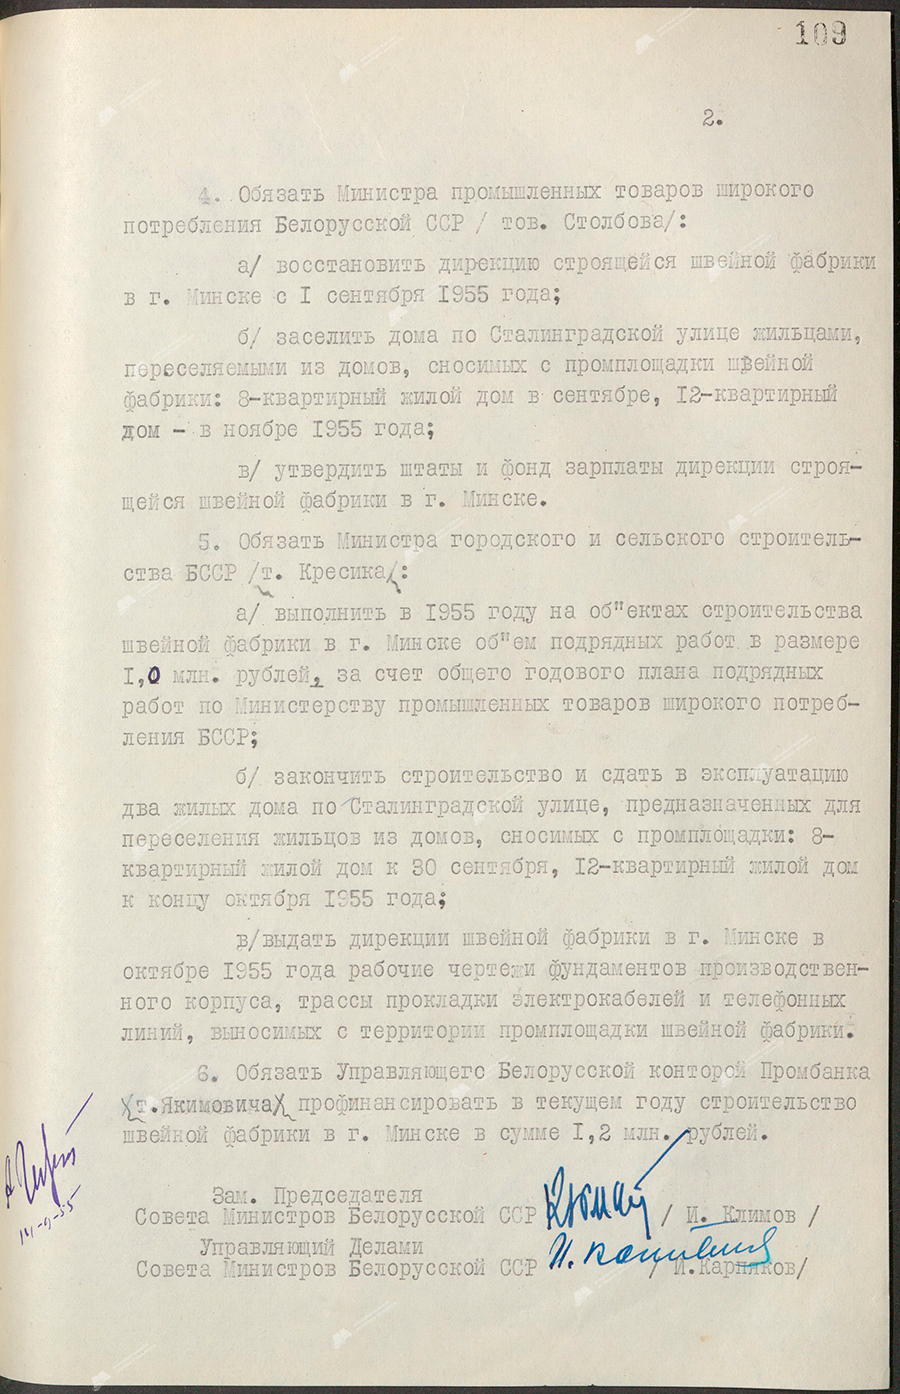 Resolution No. 512 of the Council of Ministers of the Byelorussian SSR «On approval of a comprehensive design assignment for the construction of a garment factory in Minsk»-с. 1